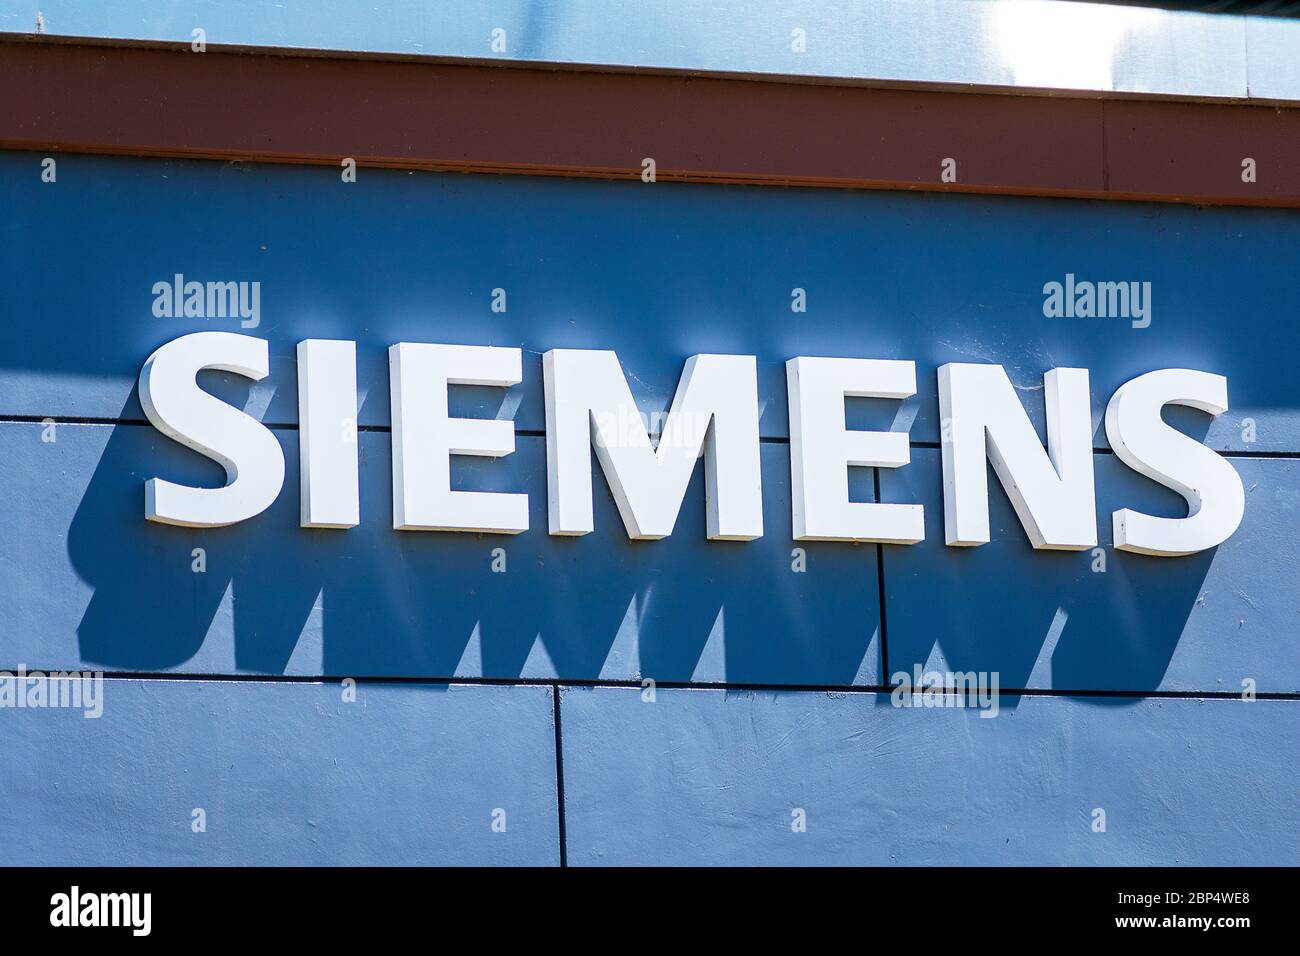 Siemens sign at German multinational conglomerate company Siemens AG office in Silicon Valley - Campbell, CA, USA - 2020 Stock Photo